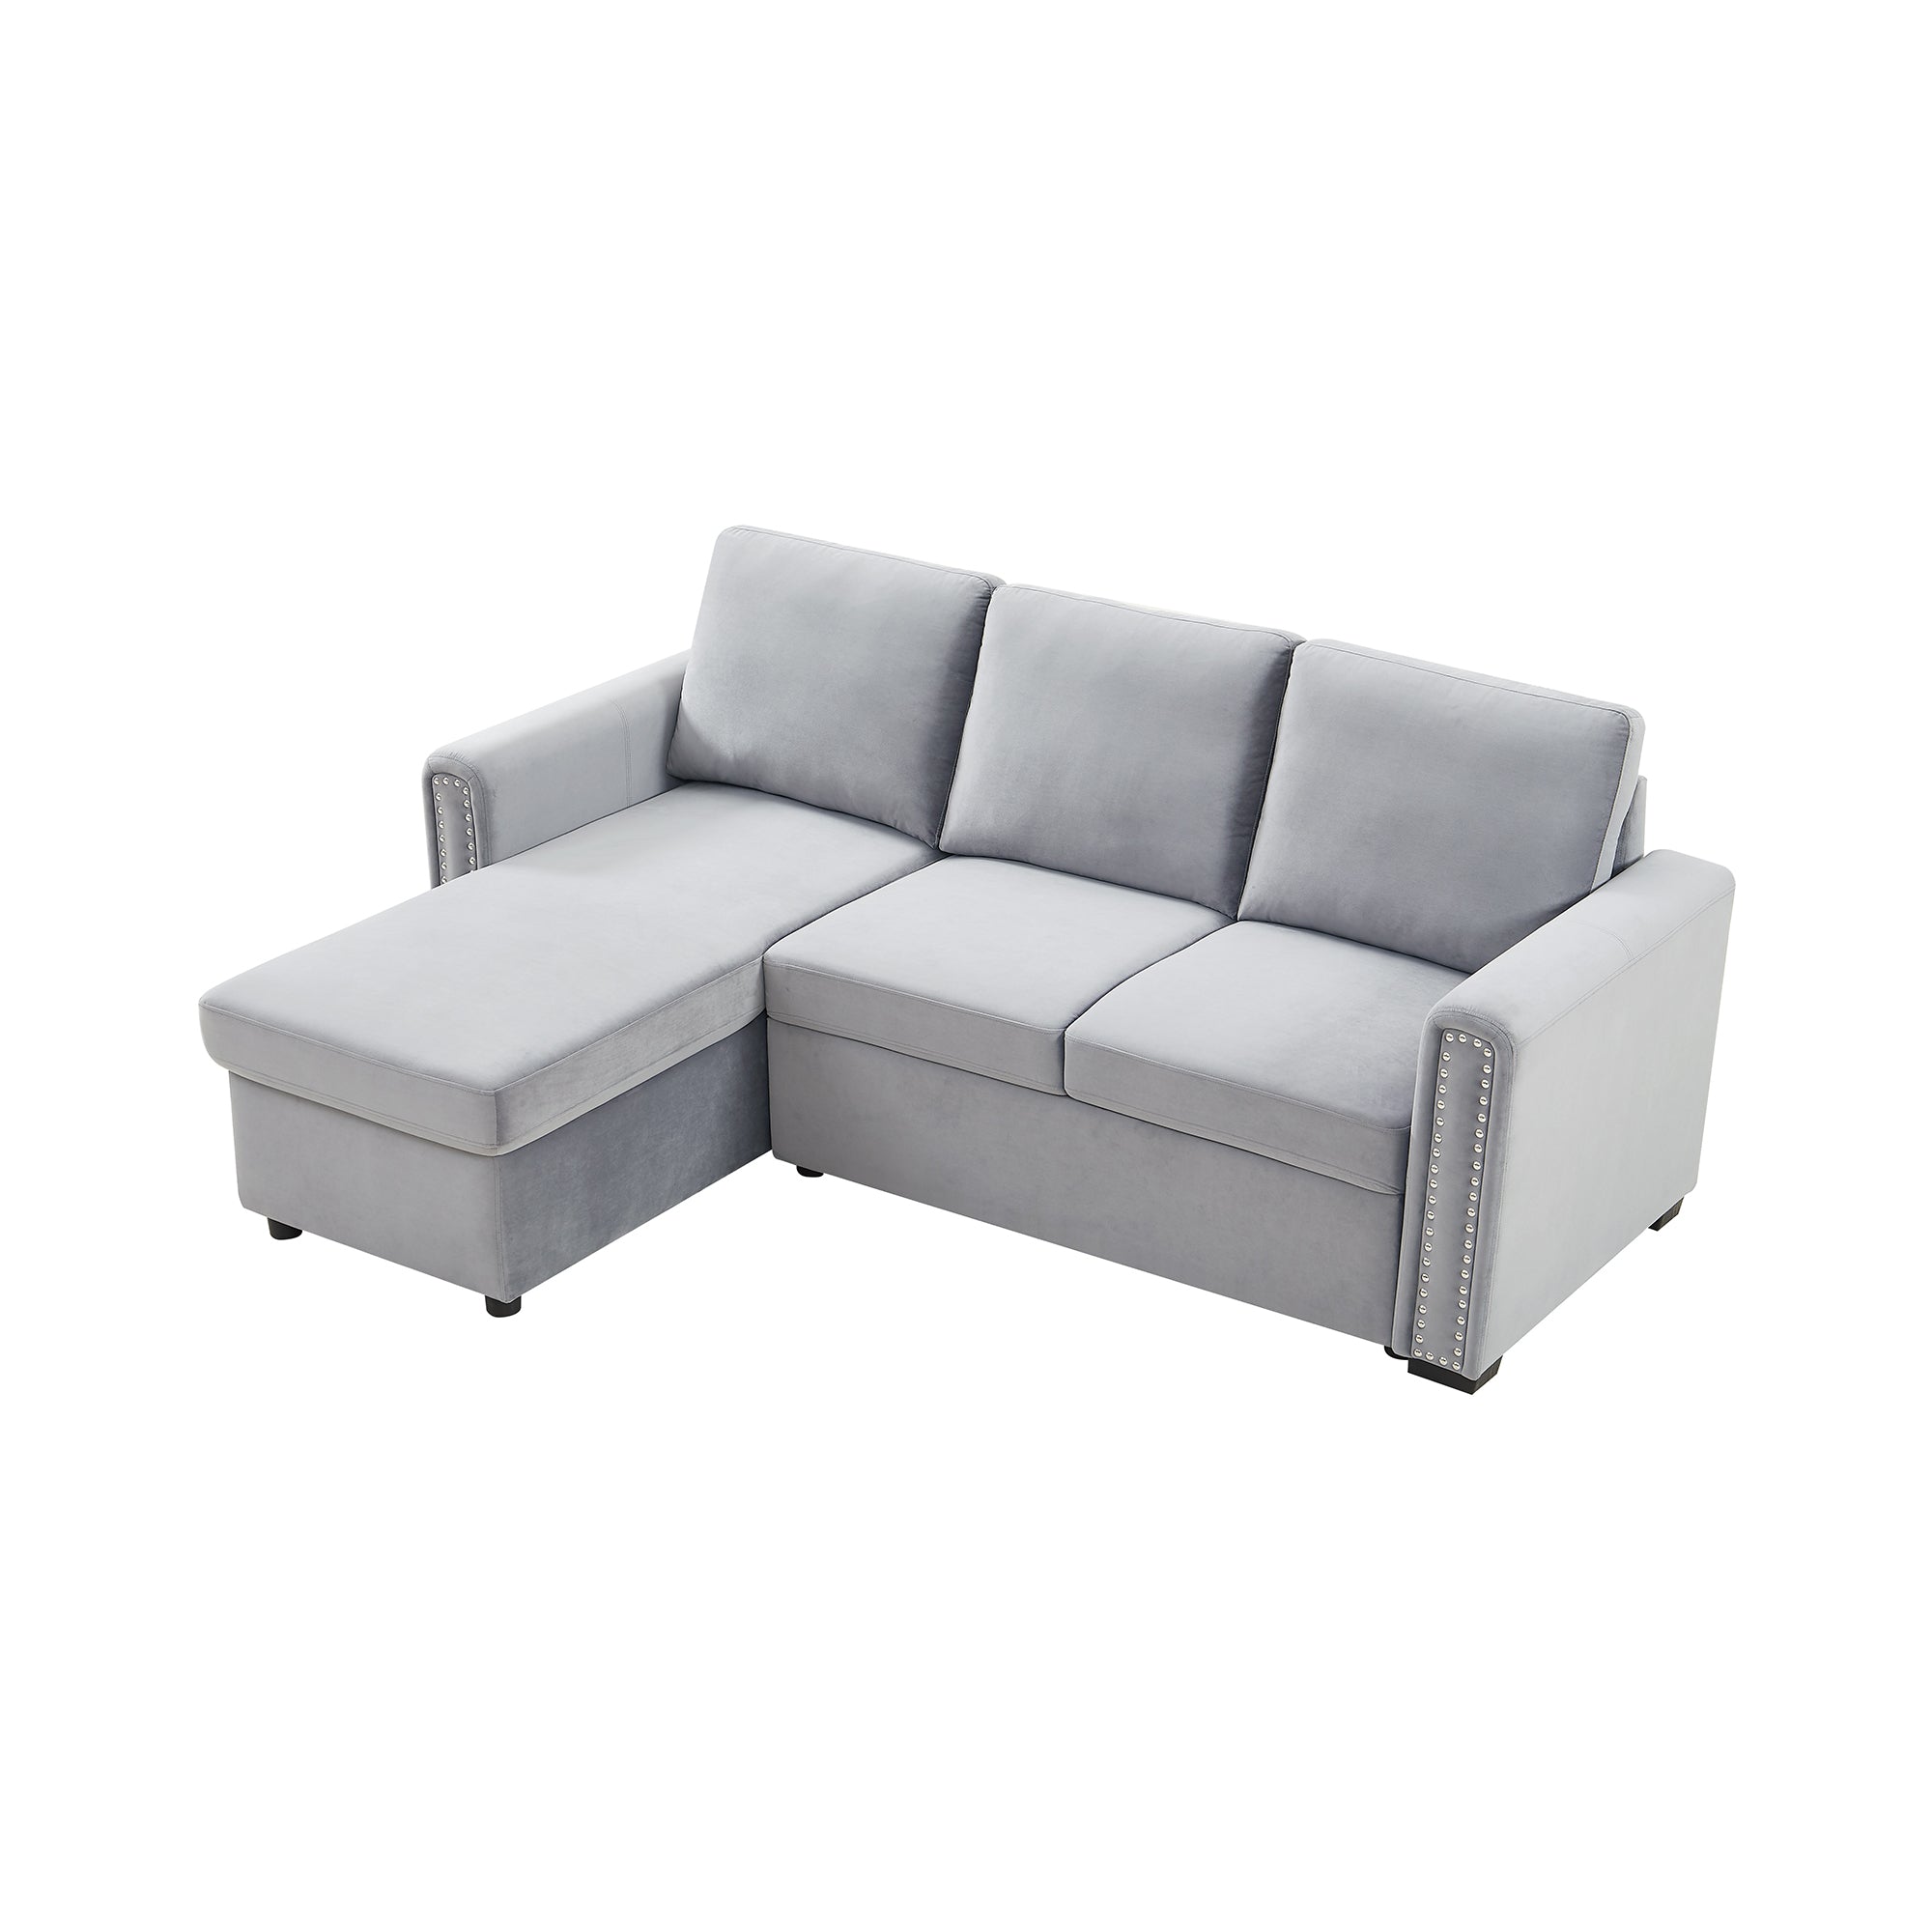 83" Convertible 3-Seater L-Shape Corner Sectional Sofa Couch with Storage-Boyel Living